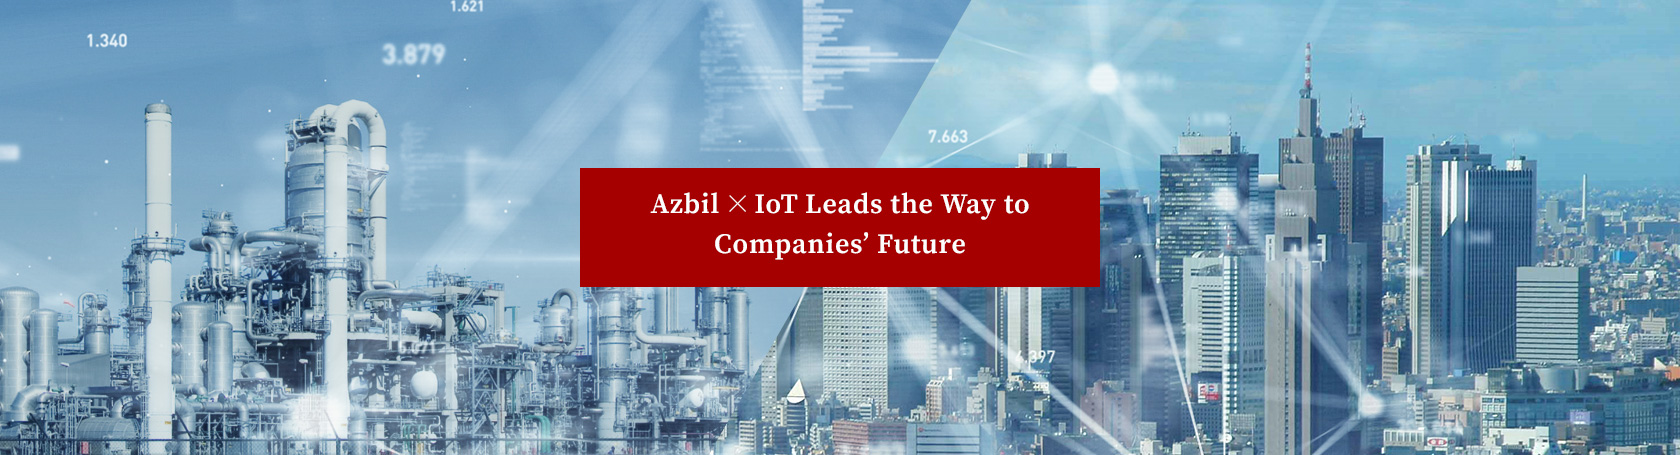 Azbil × IoT Leads the Way to Companies’ Future